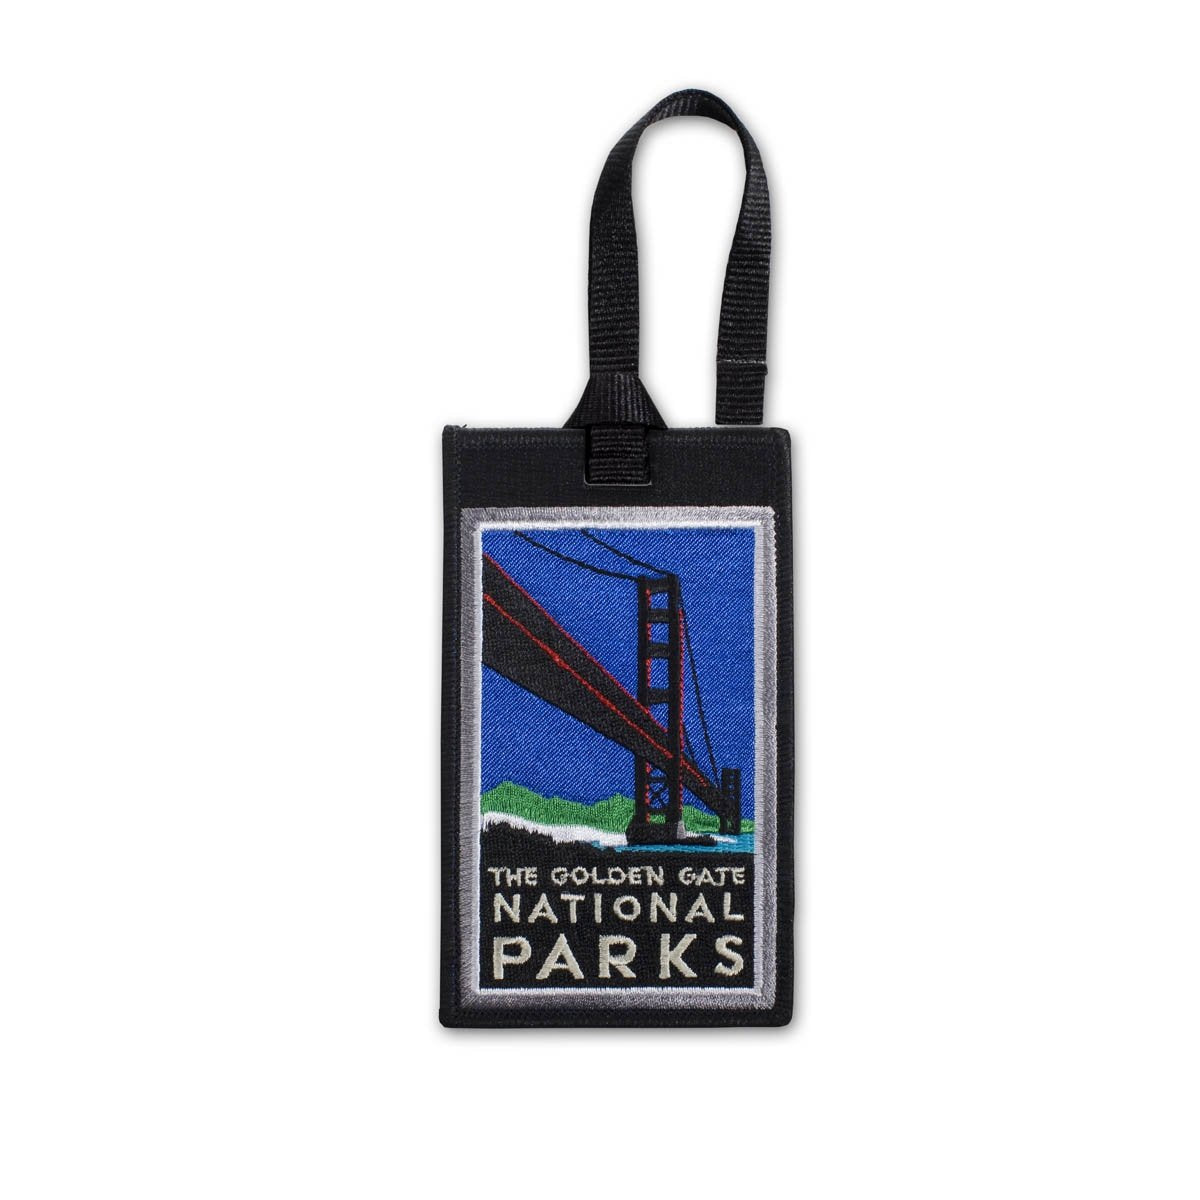 Multicolor embroidered luggage tag with design of Golden Gate National Parks Bridge, based on artwork by Michael Schwab.